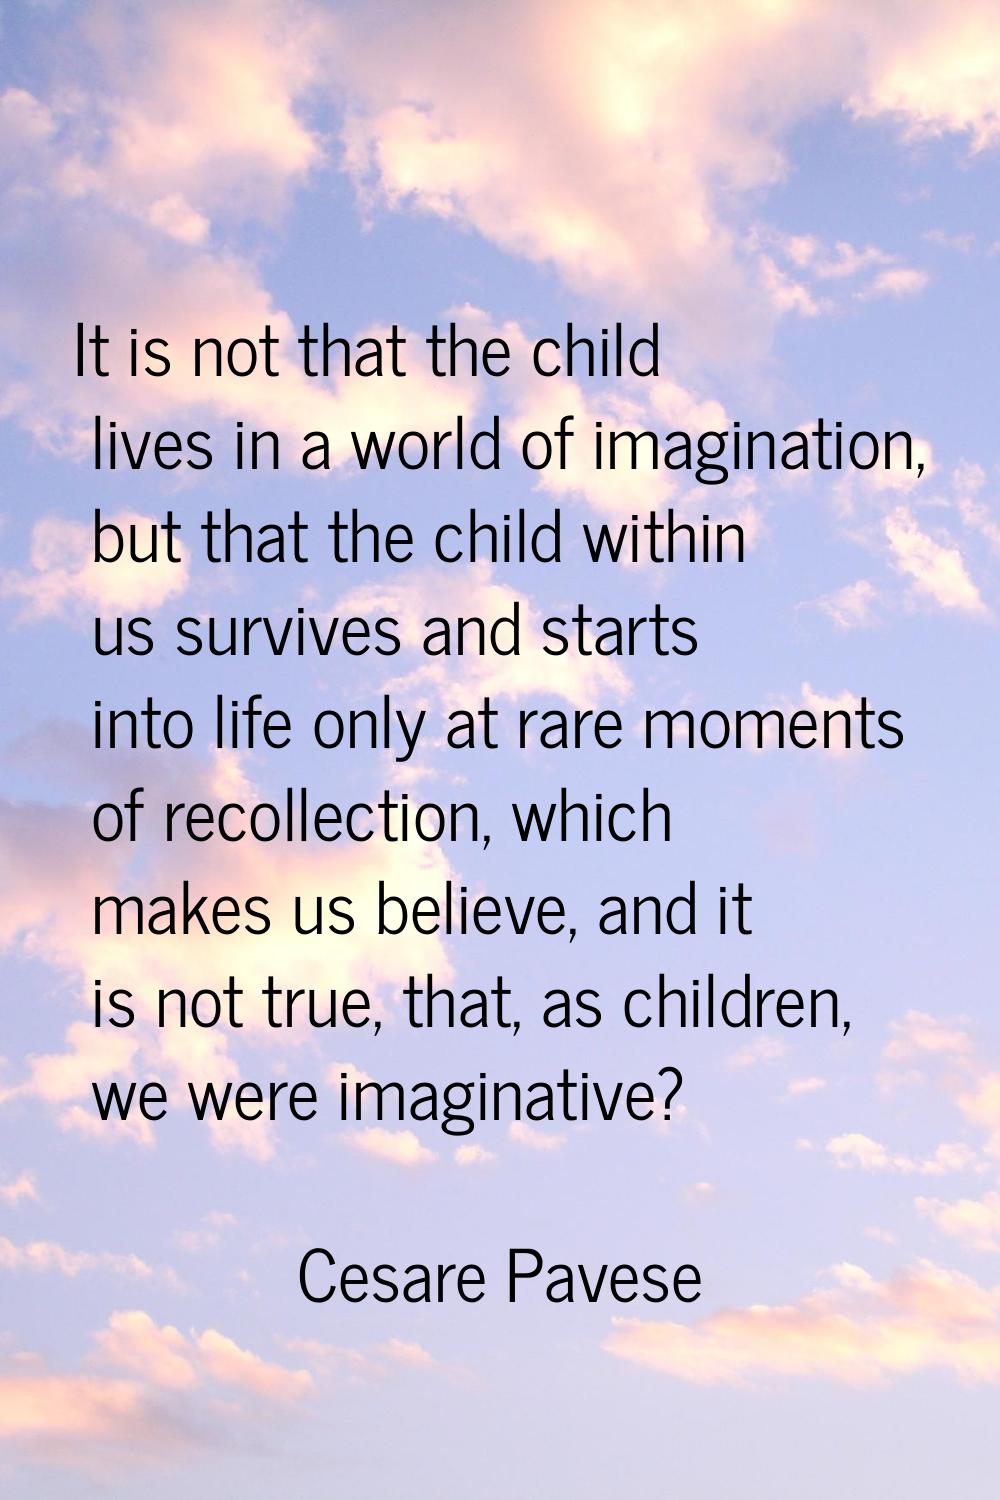 It is not that the child lives in a world of imagination, but that the child within us survives and